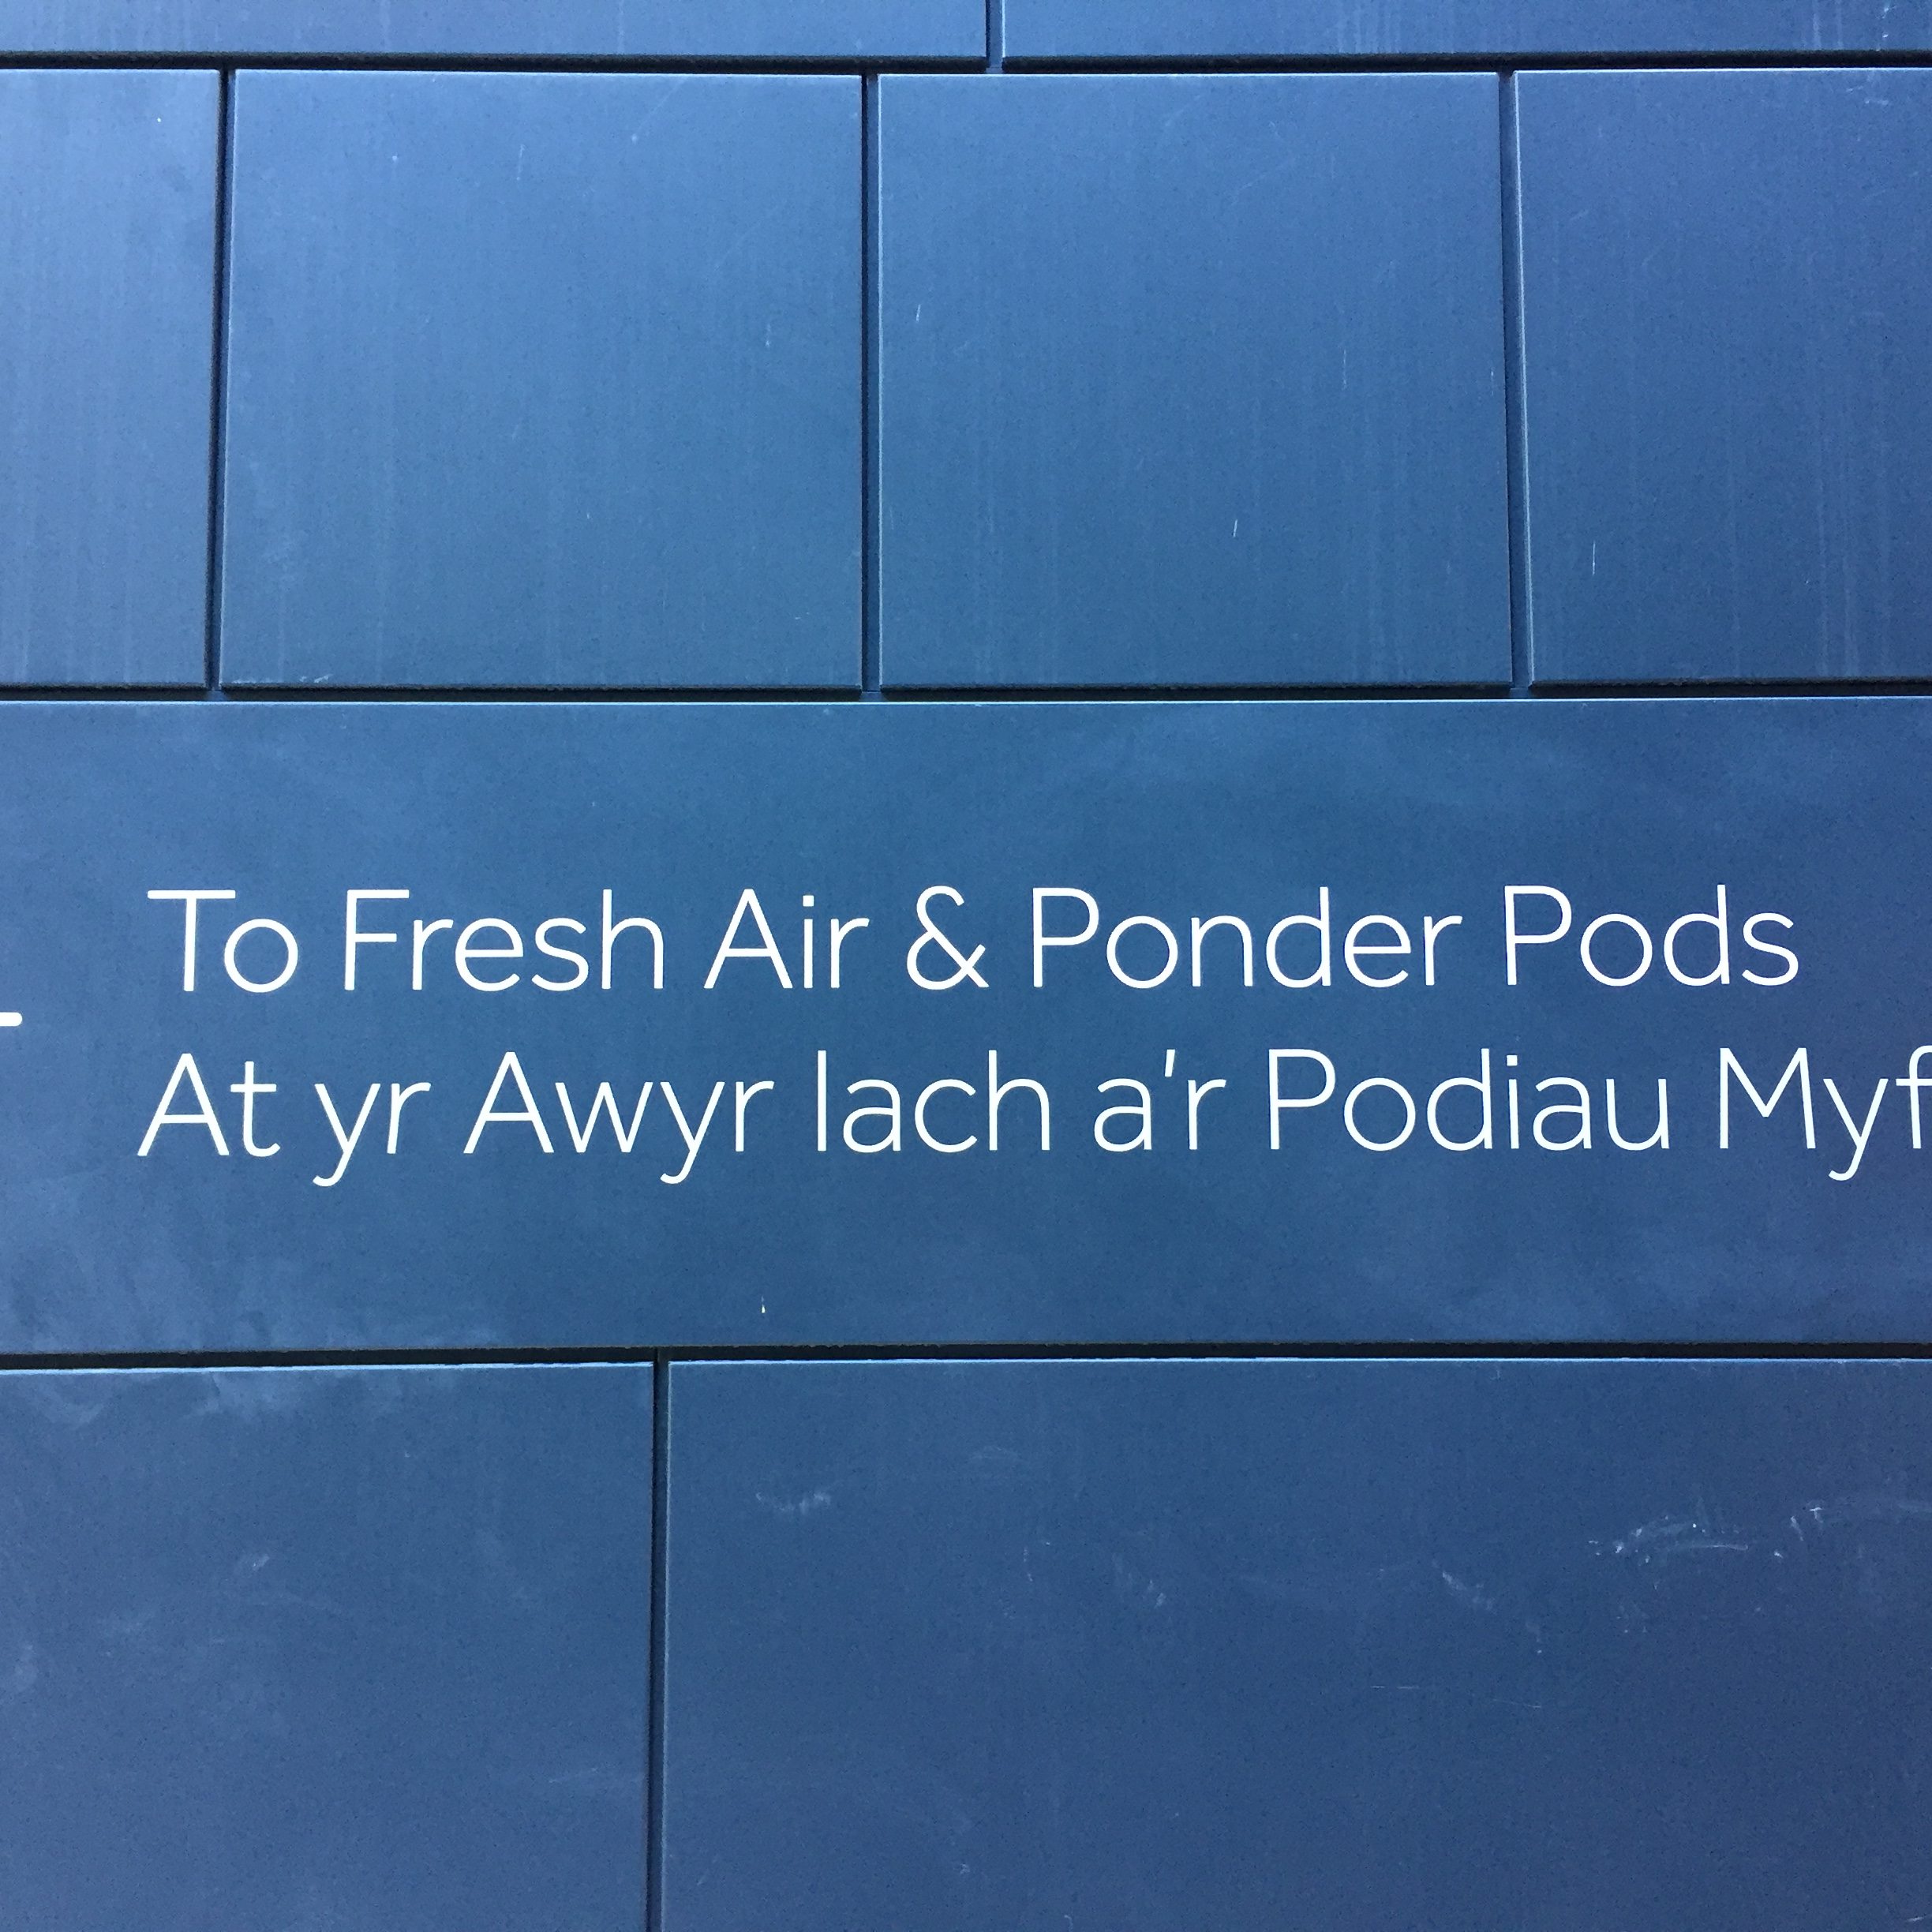 ICC Wales - Water Point ponder pods sign